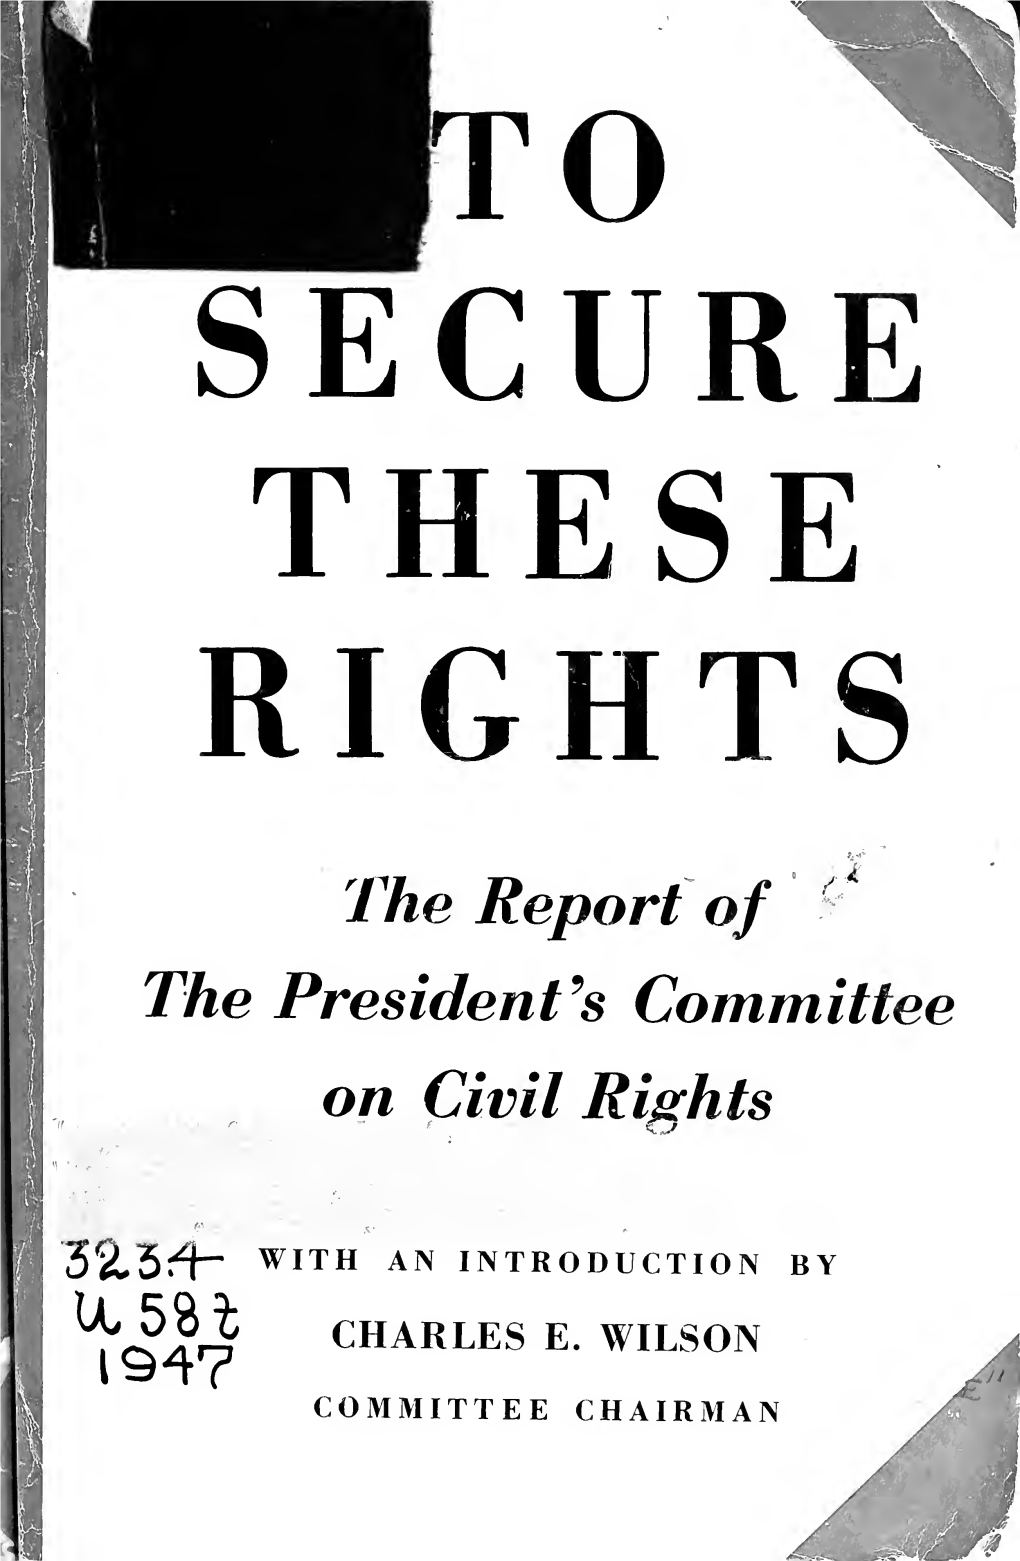 To Secure These Rights, the Report of the President's Committee on Civil